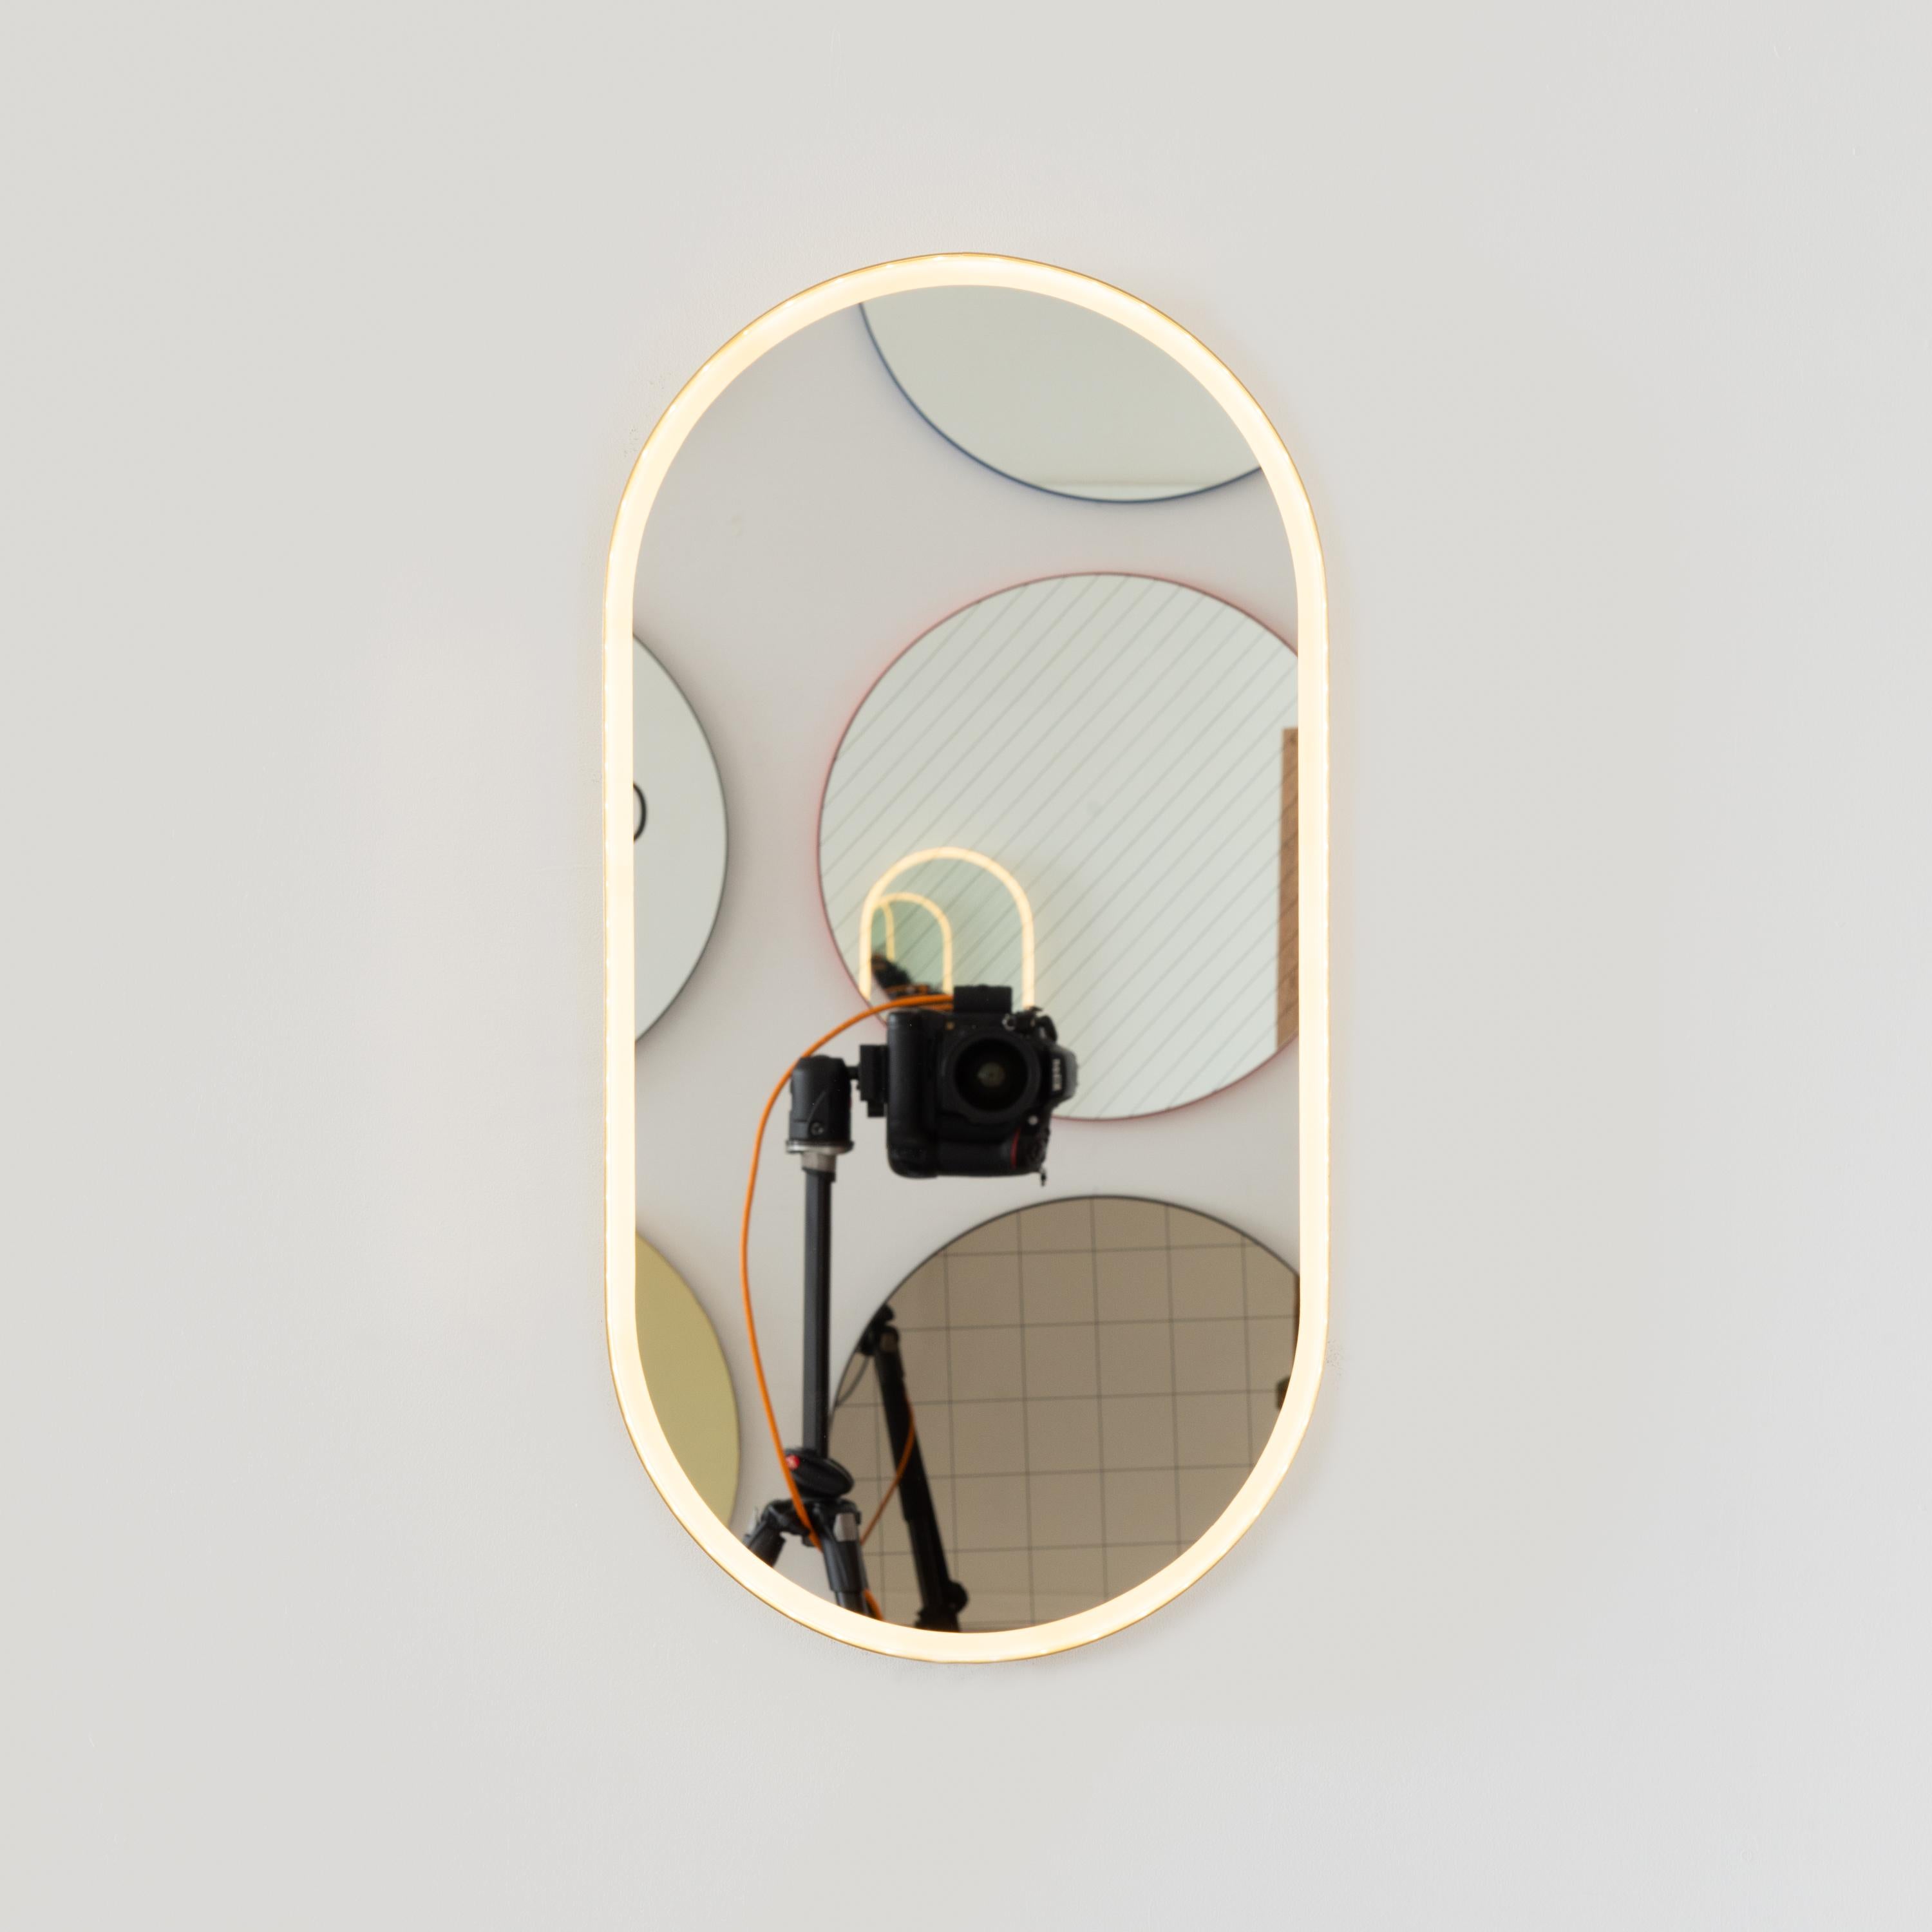 Modern handcrafted front illuminated capsule shaped mirror with an elegant brushed brass frame. Designed and handcrafted in London, UK.

Fitted with a brass hook or an aluminium z-bar depending on the size of the mirror. Also available on demand